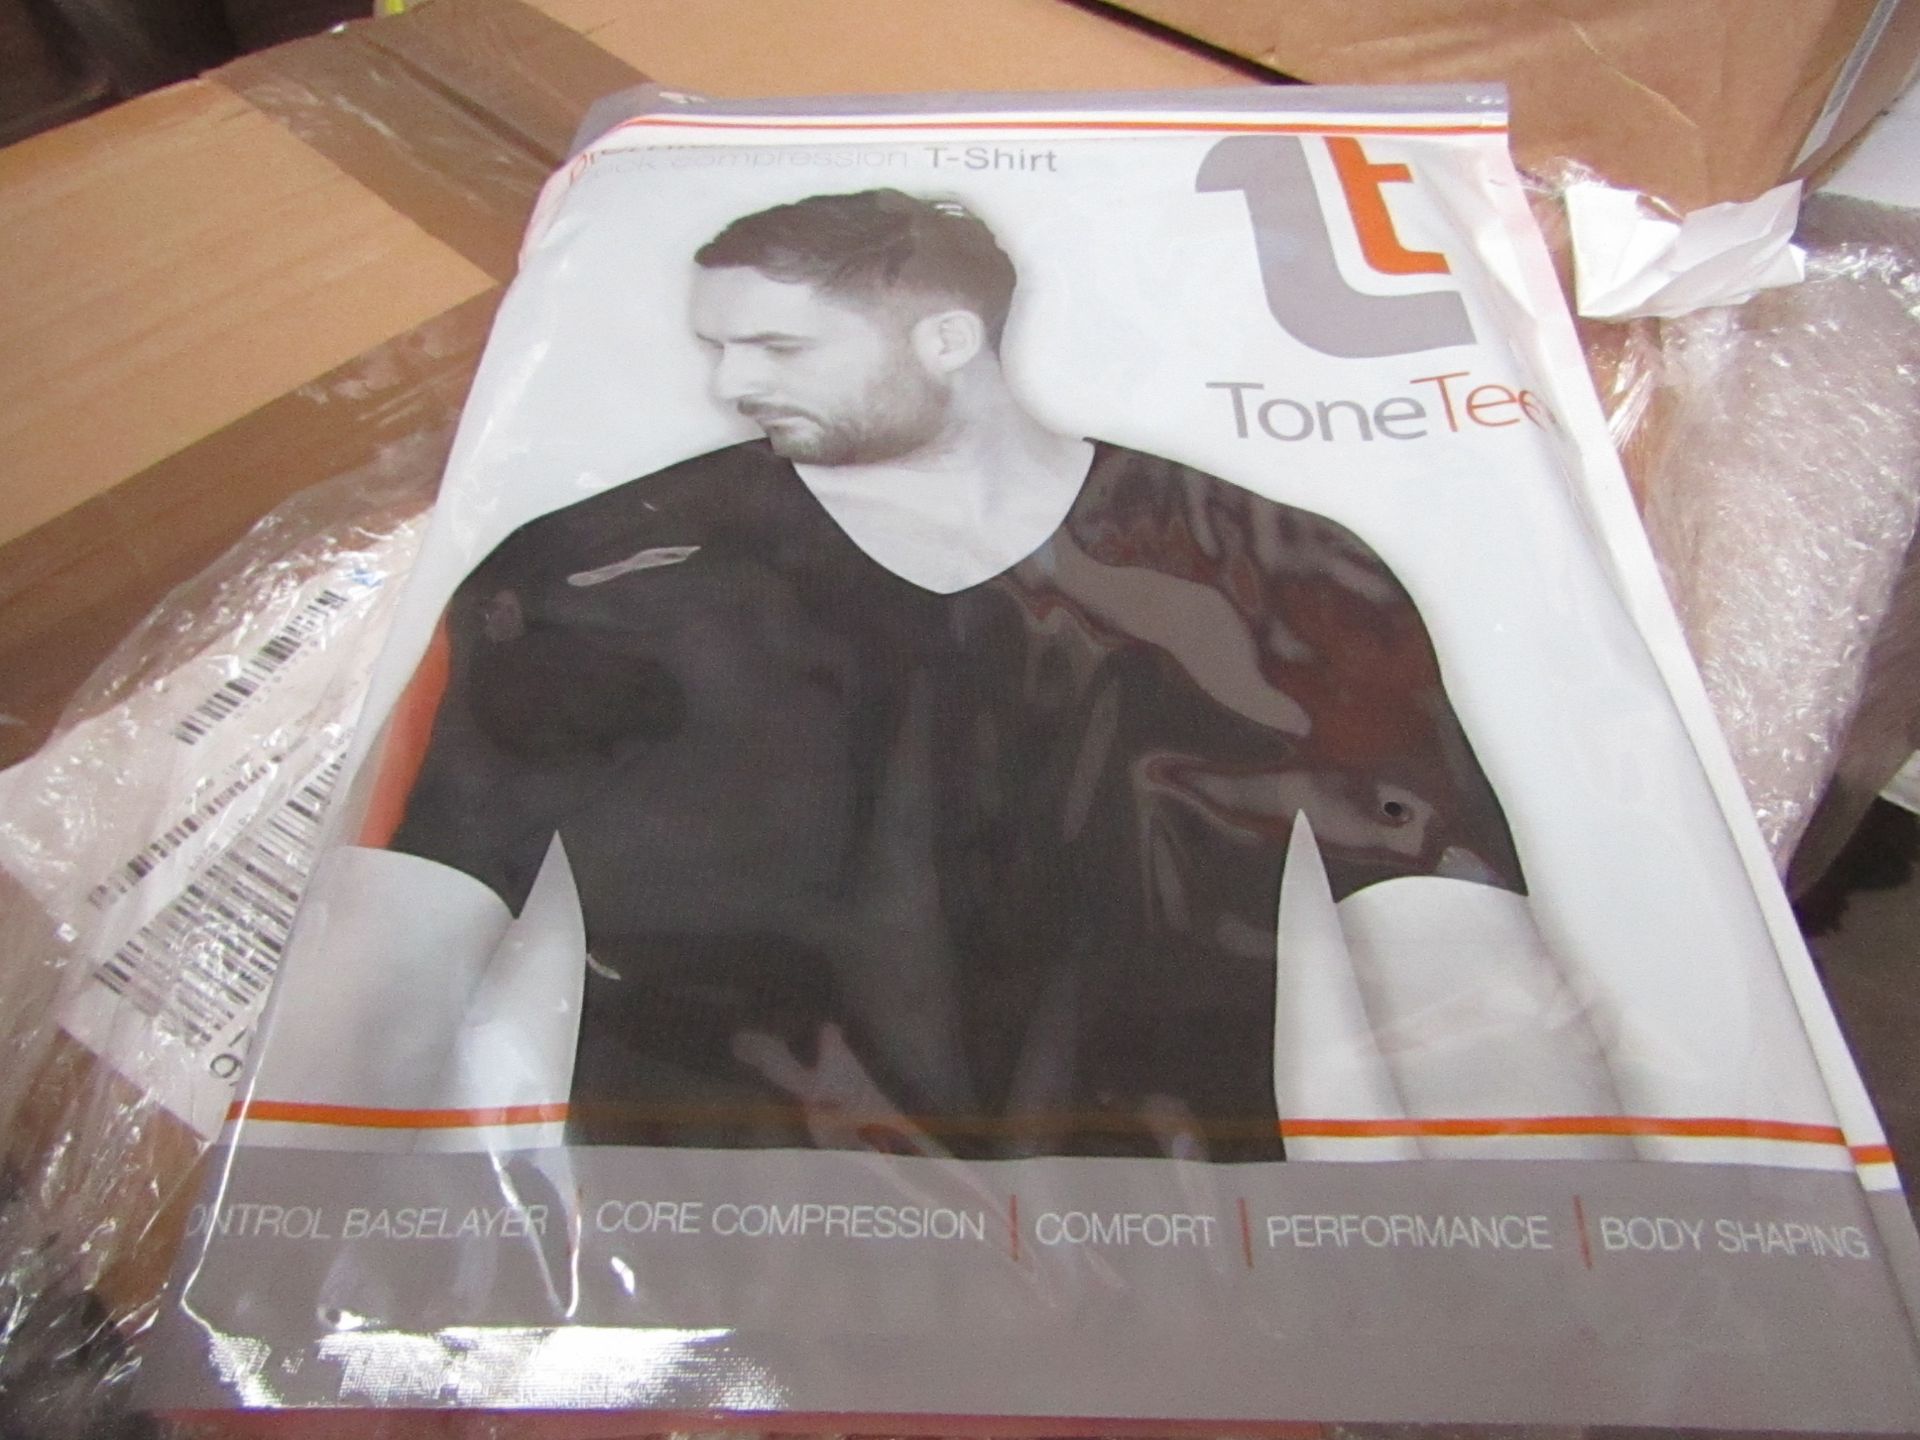 | 48x | TONE TEE V NECK COMPRESSION T-SHIRT BLACK XL | PACKAGED & BOXED | SKU 1508038582739 | RRP £